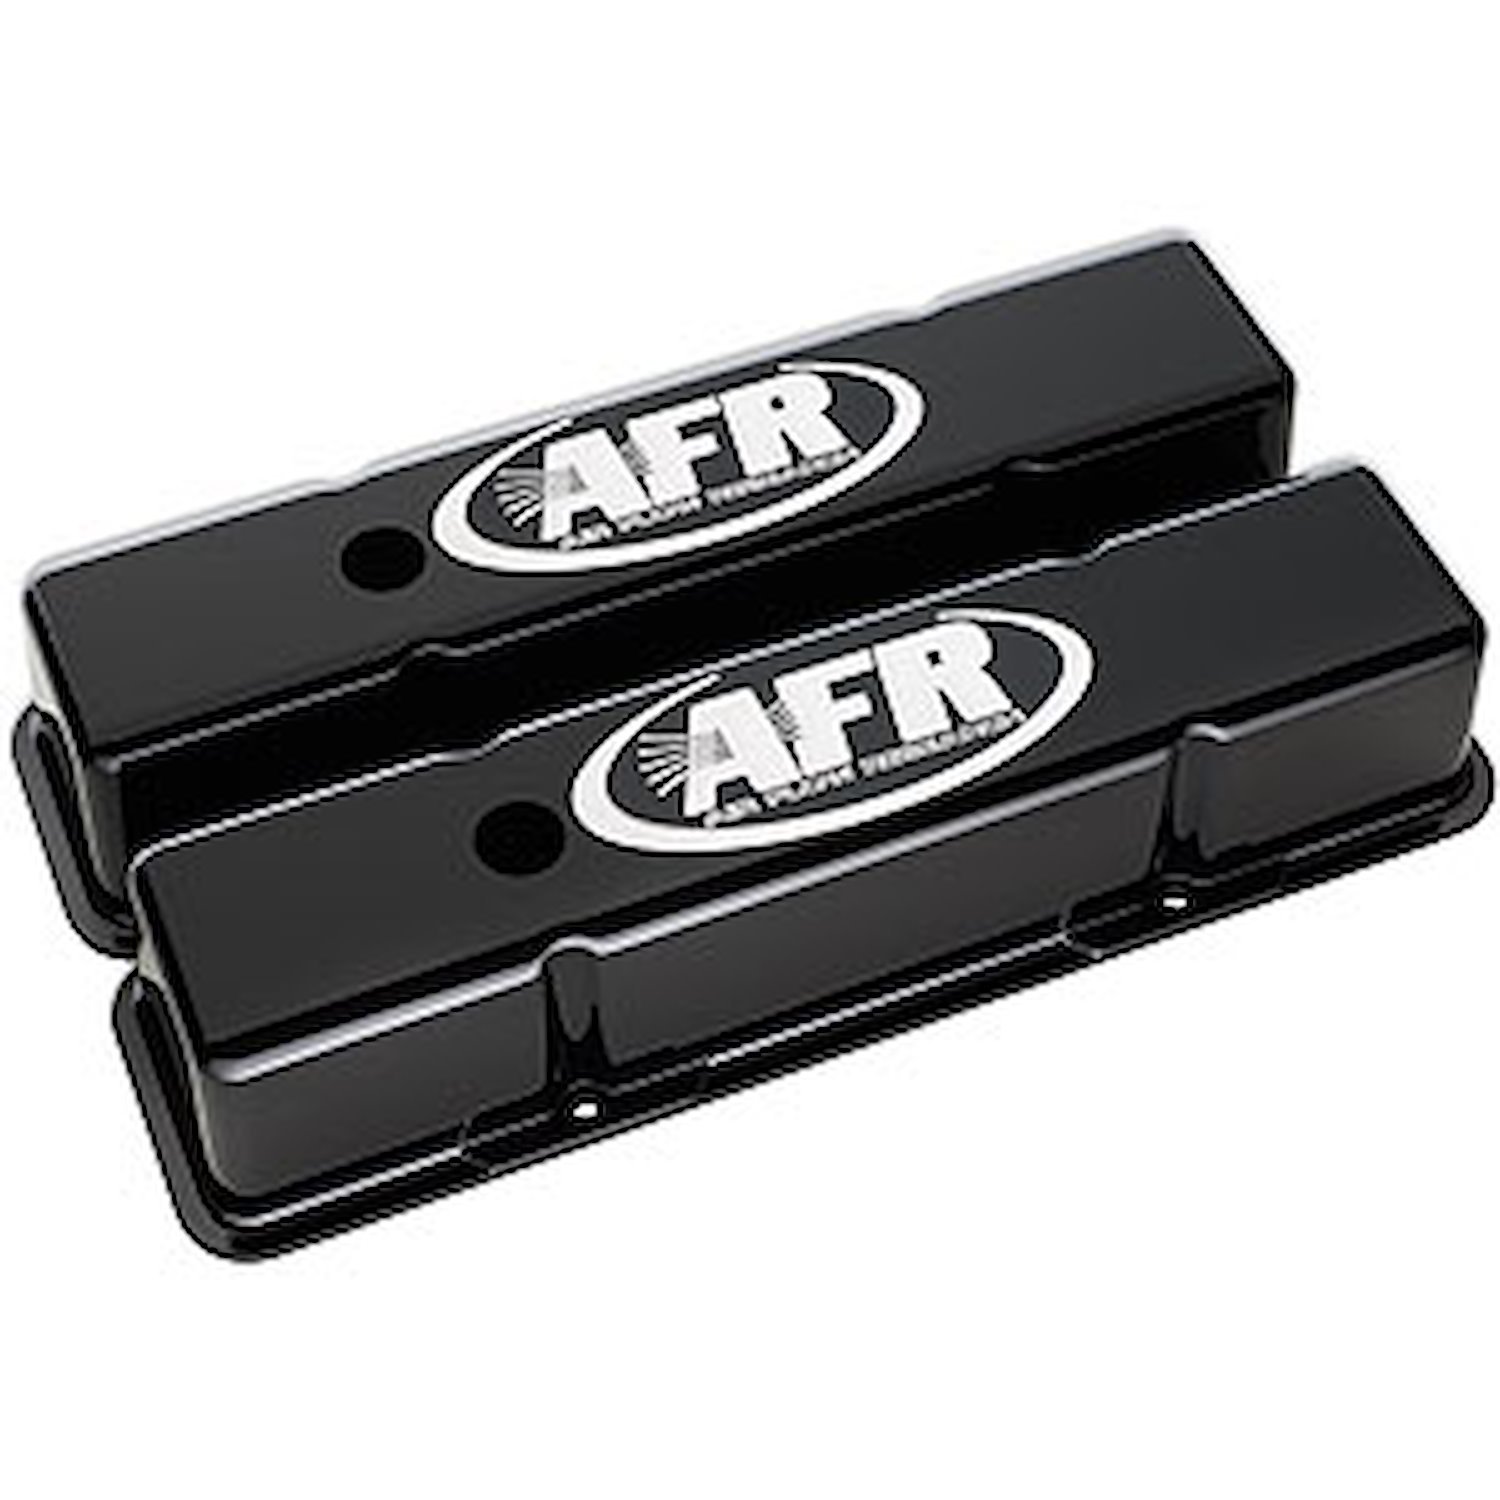 Cast Aluminum Tall Valve Covers for Small Block